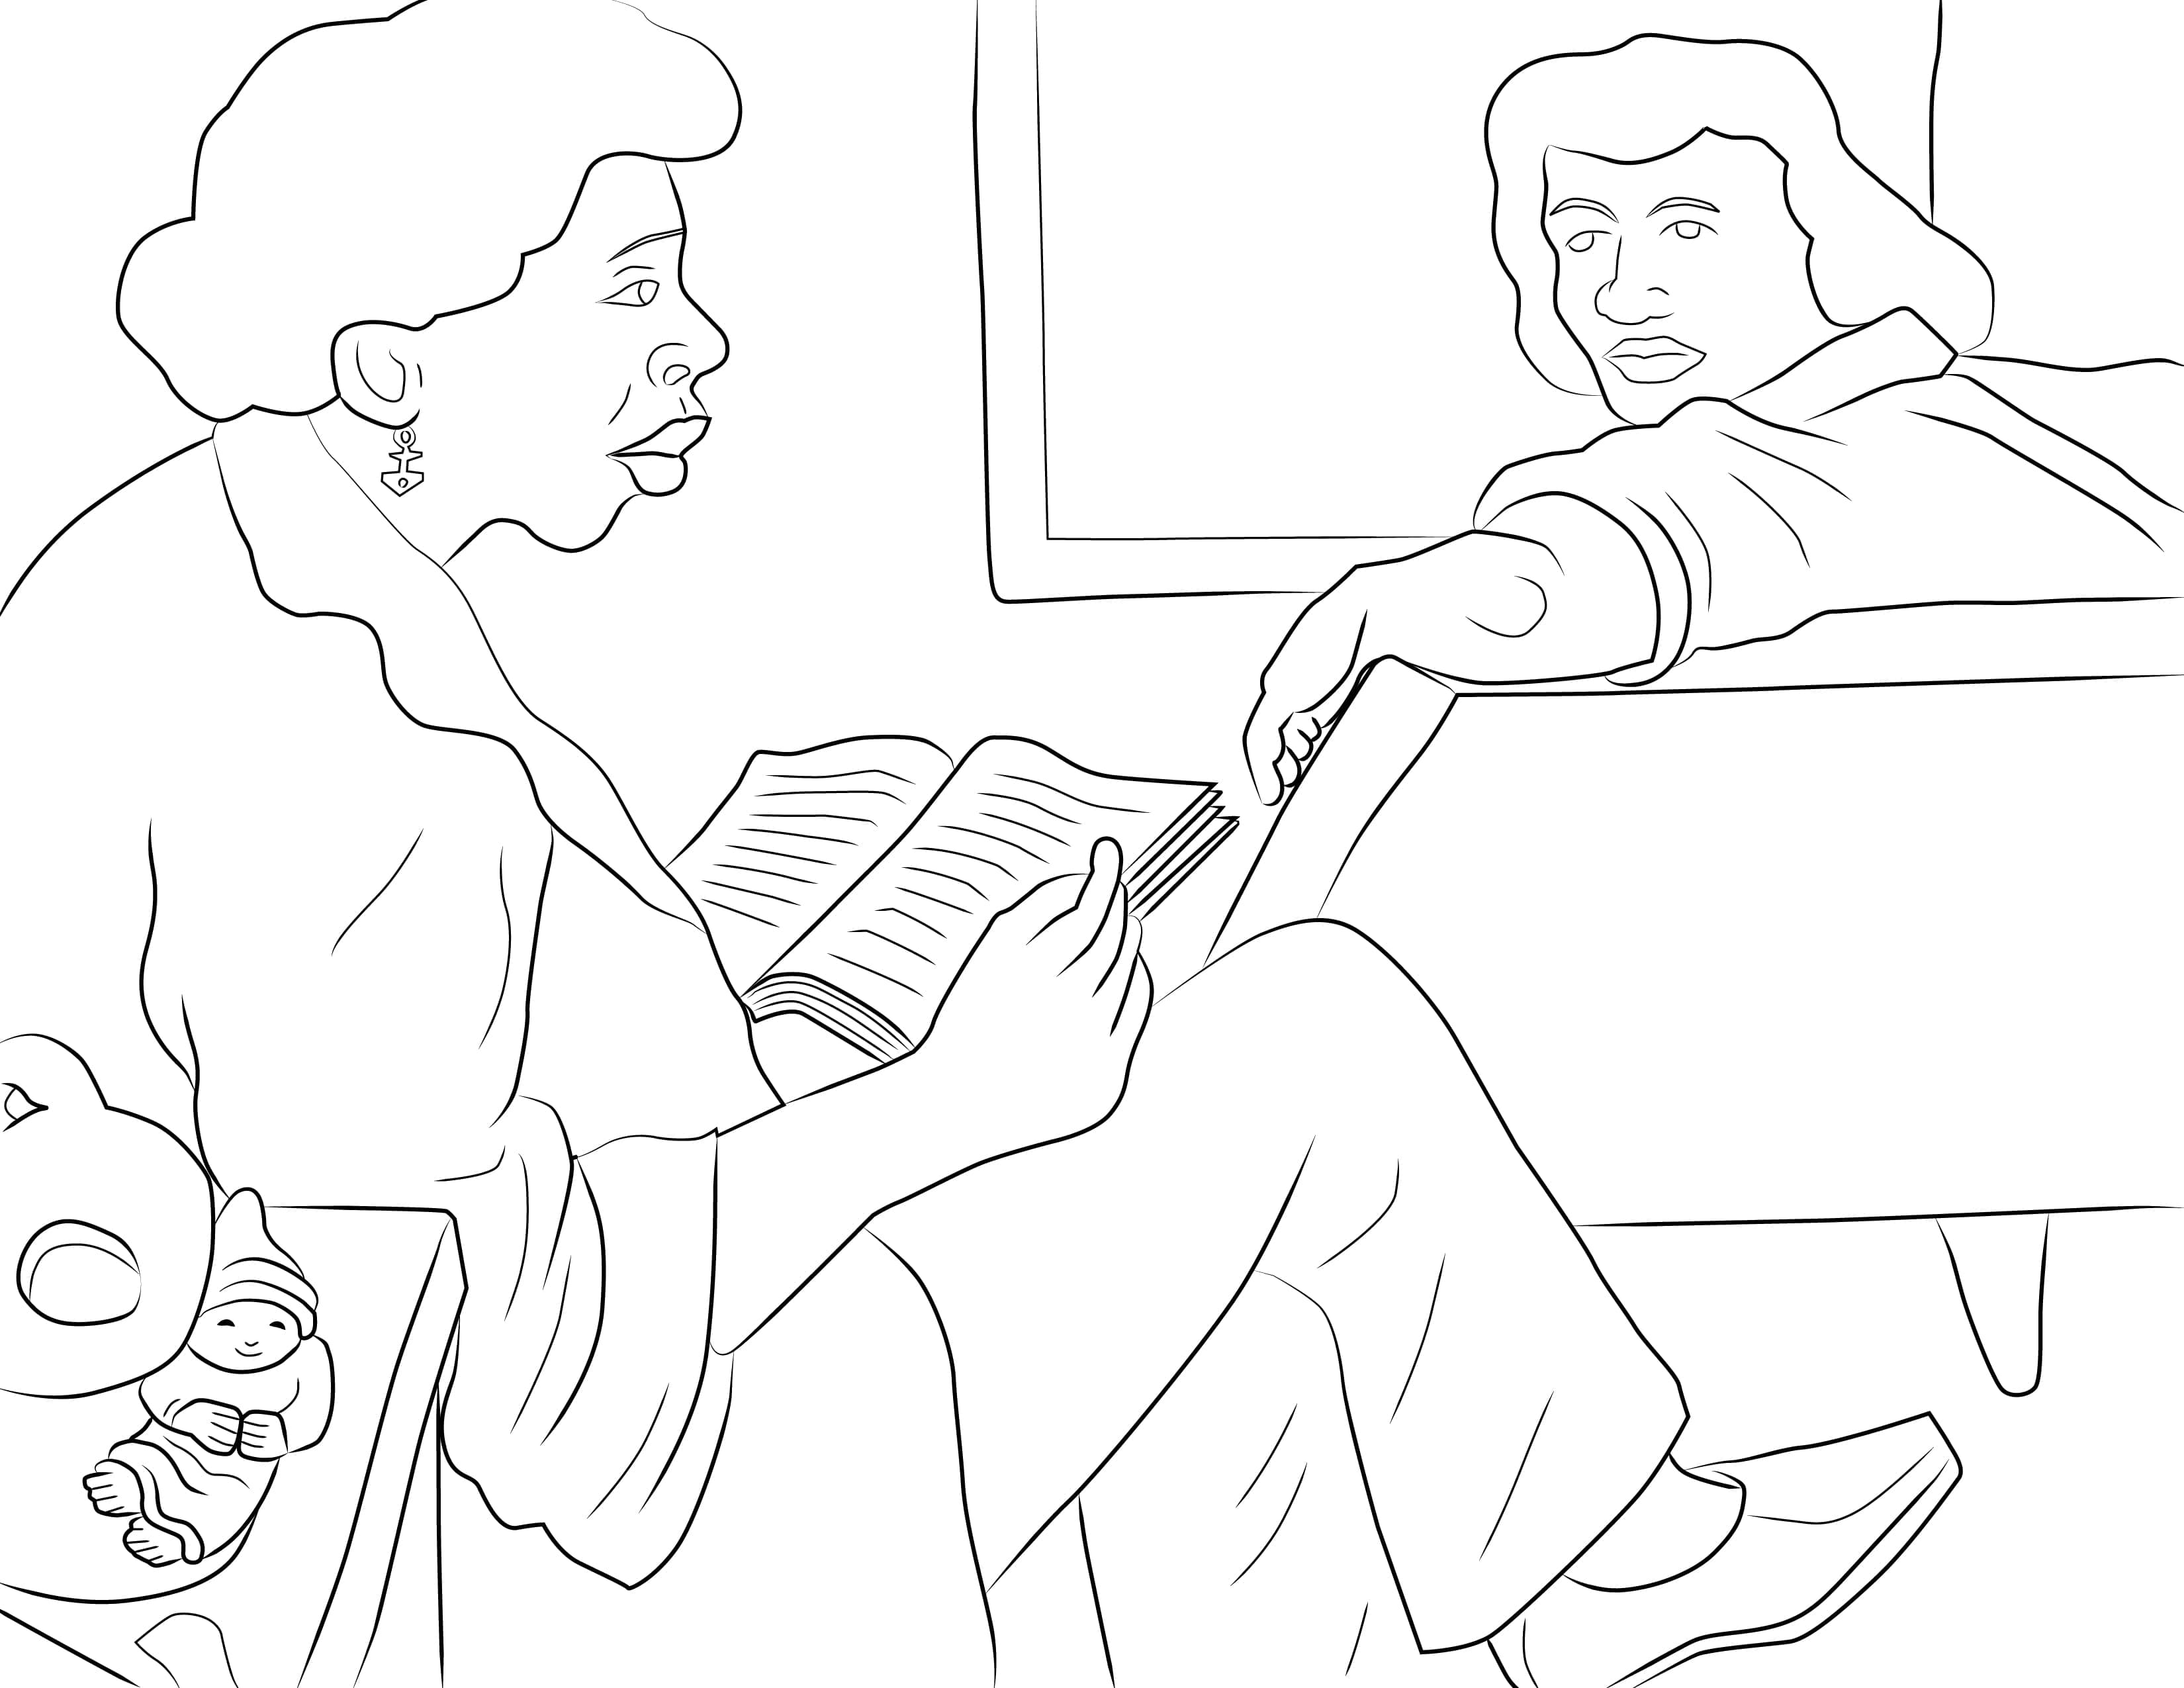 Outline of two people sitting on couch reading